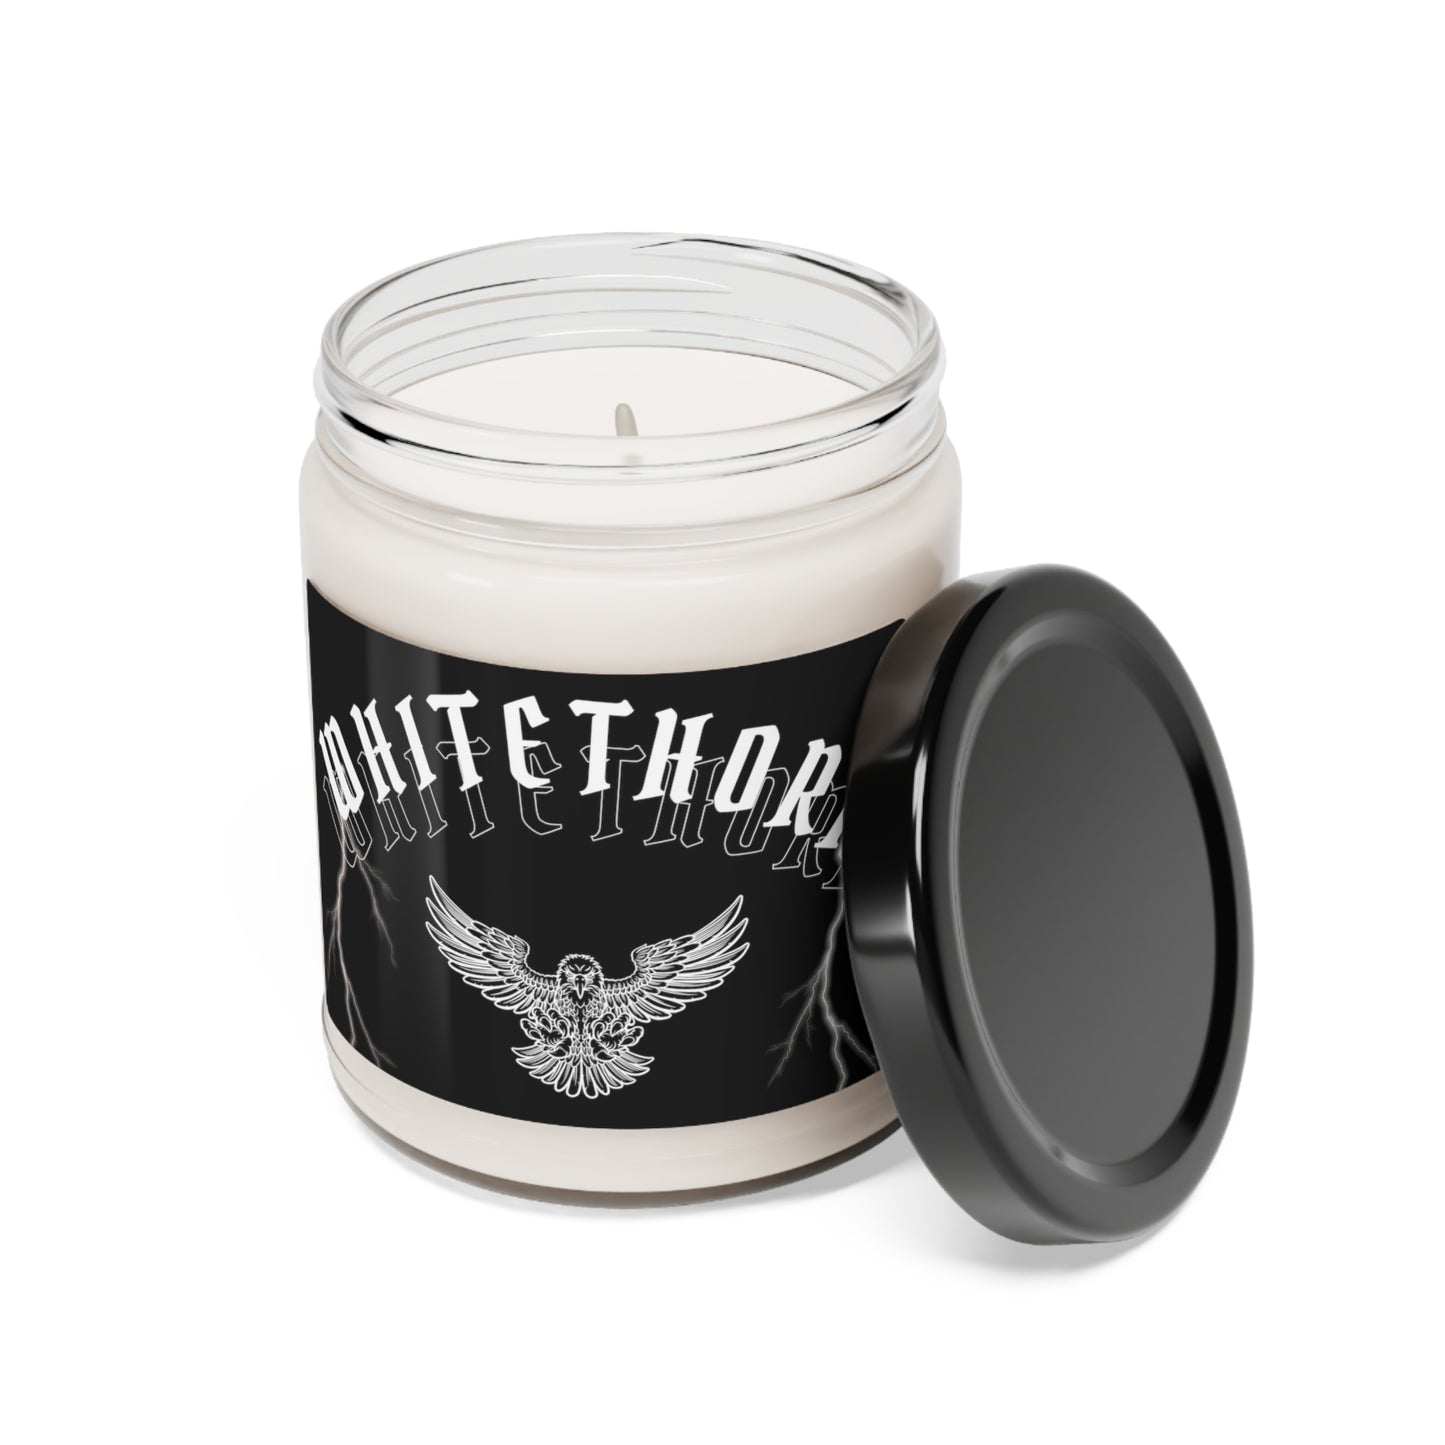 Rowan Whitethorn, Scented Soy Candle, 9oz, Throne of Glass